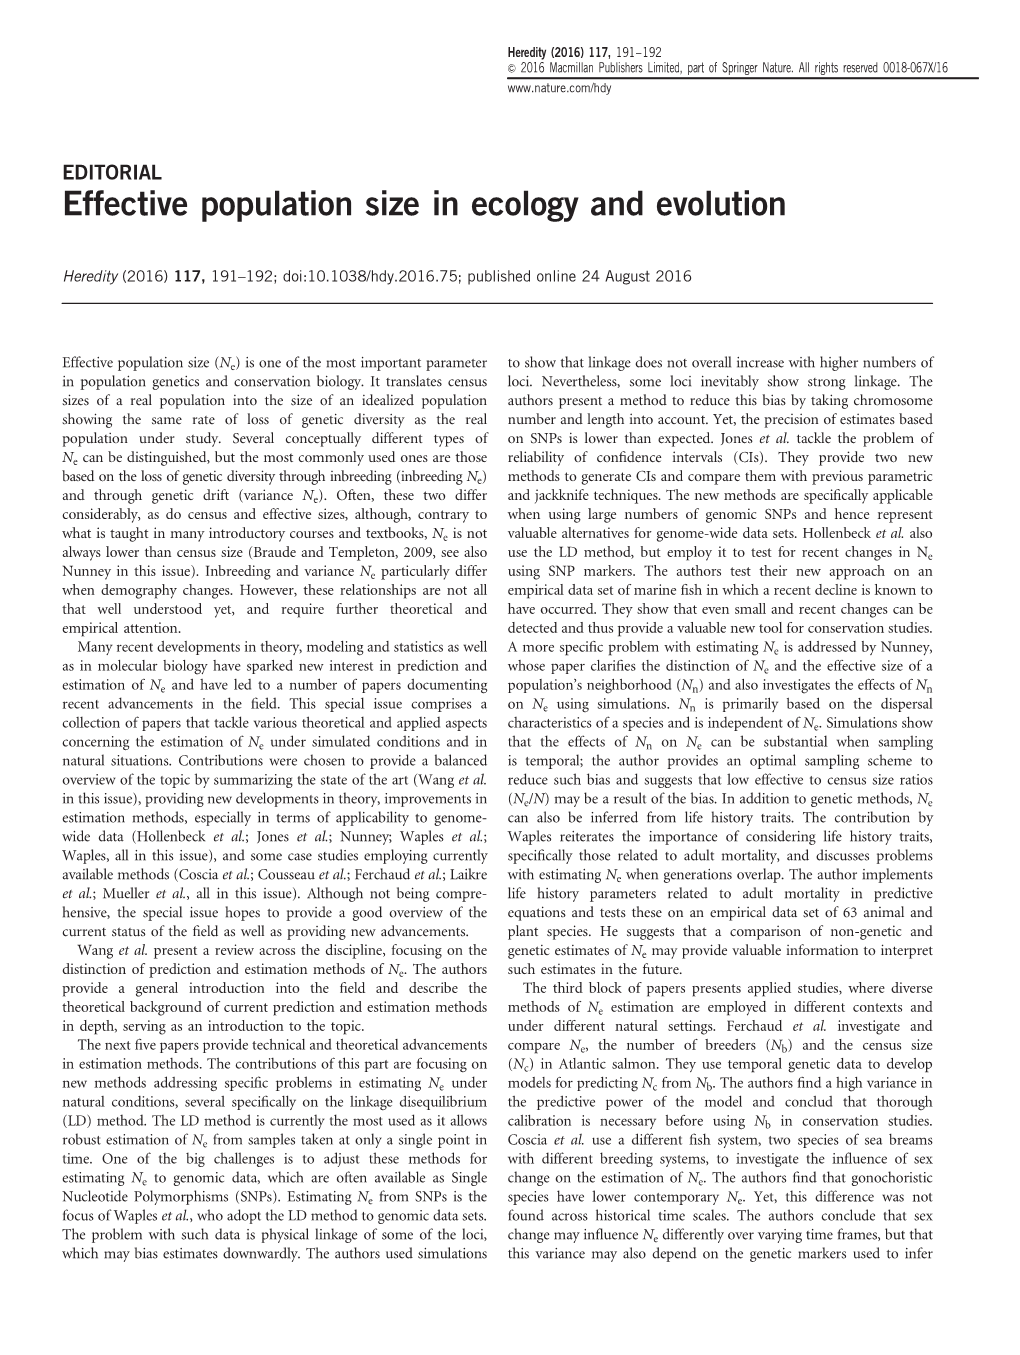 Effective Population Size in Ecology and Evolution